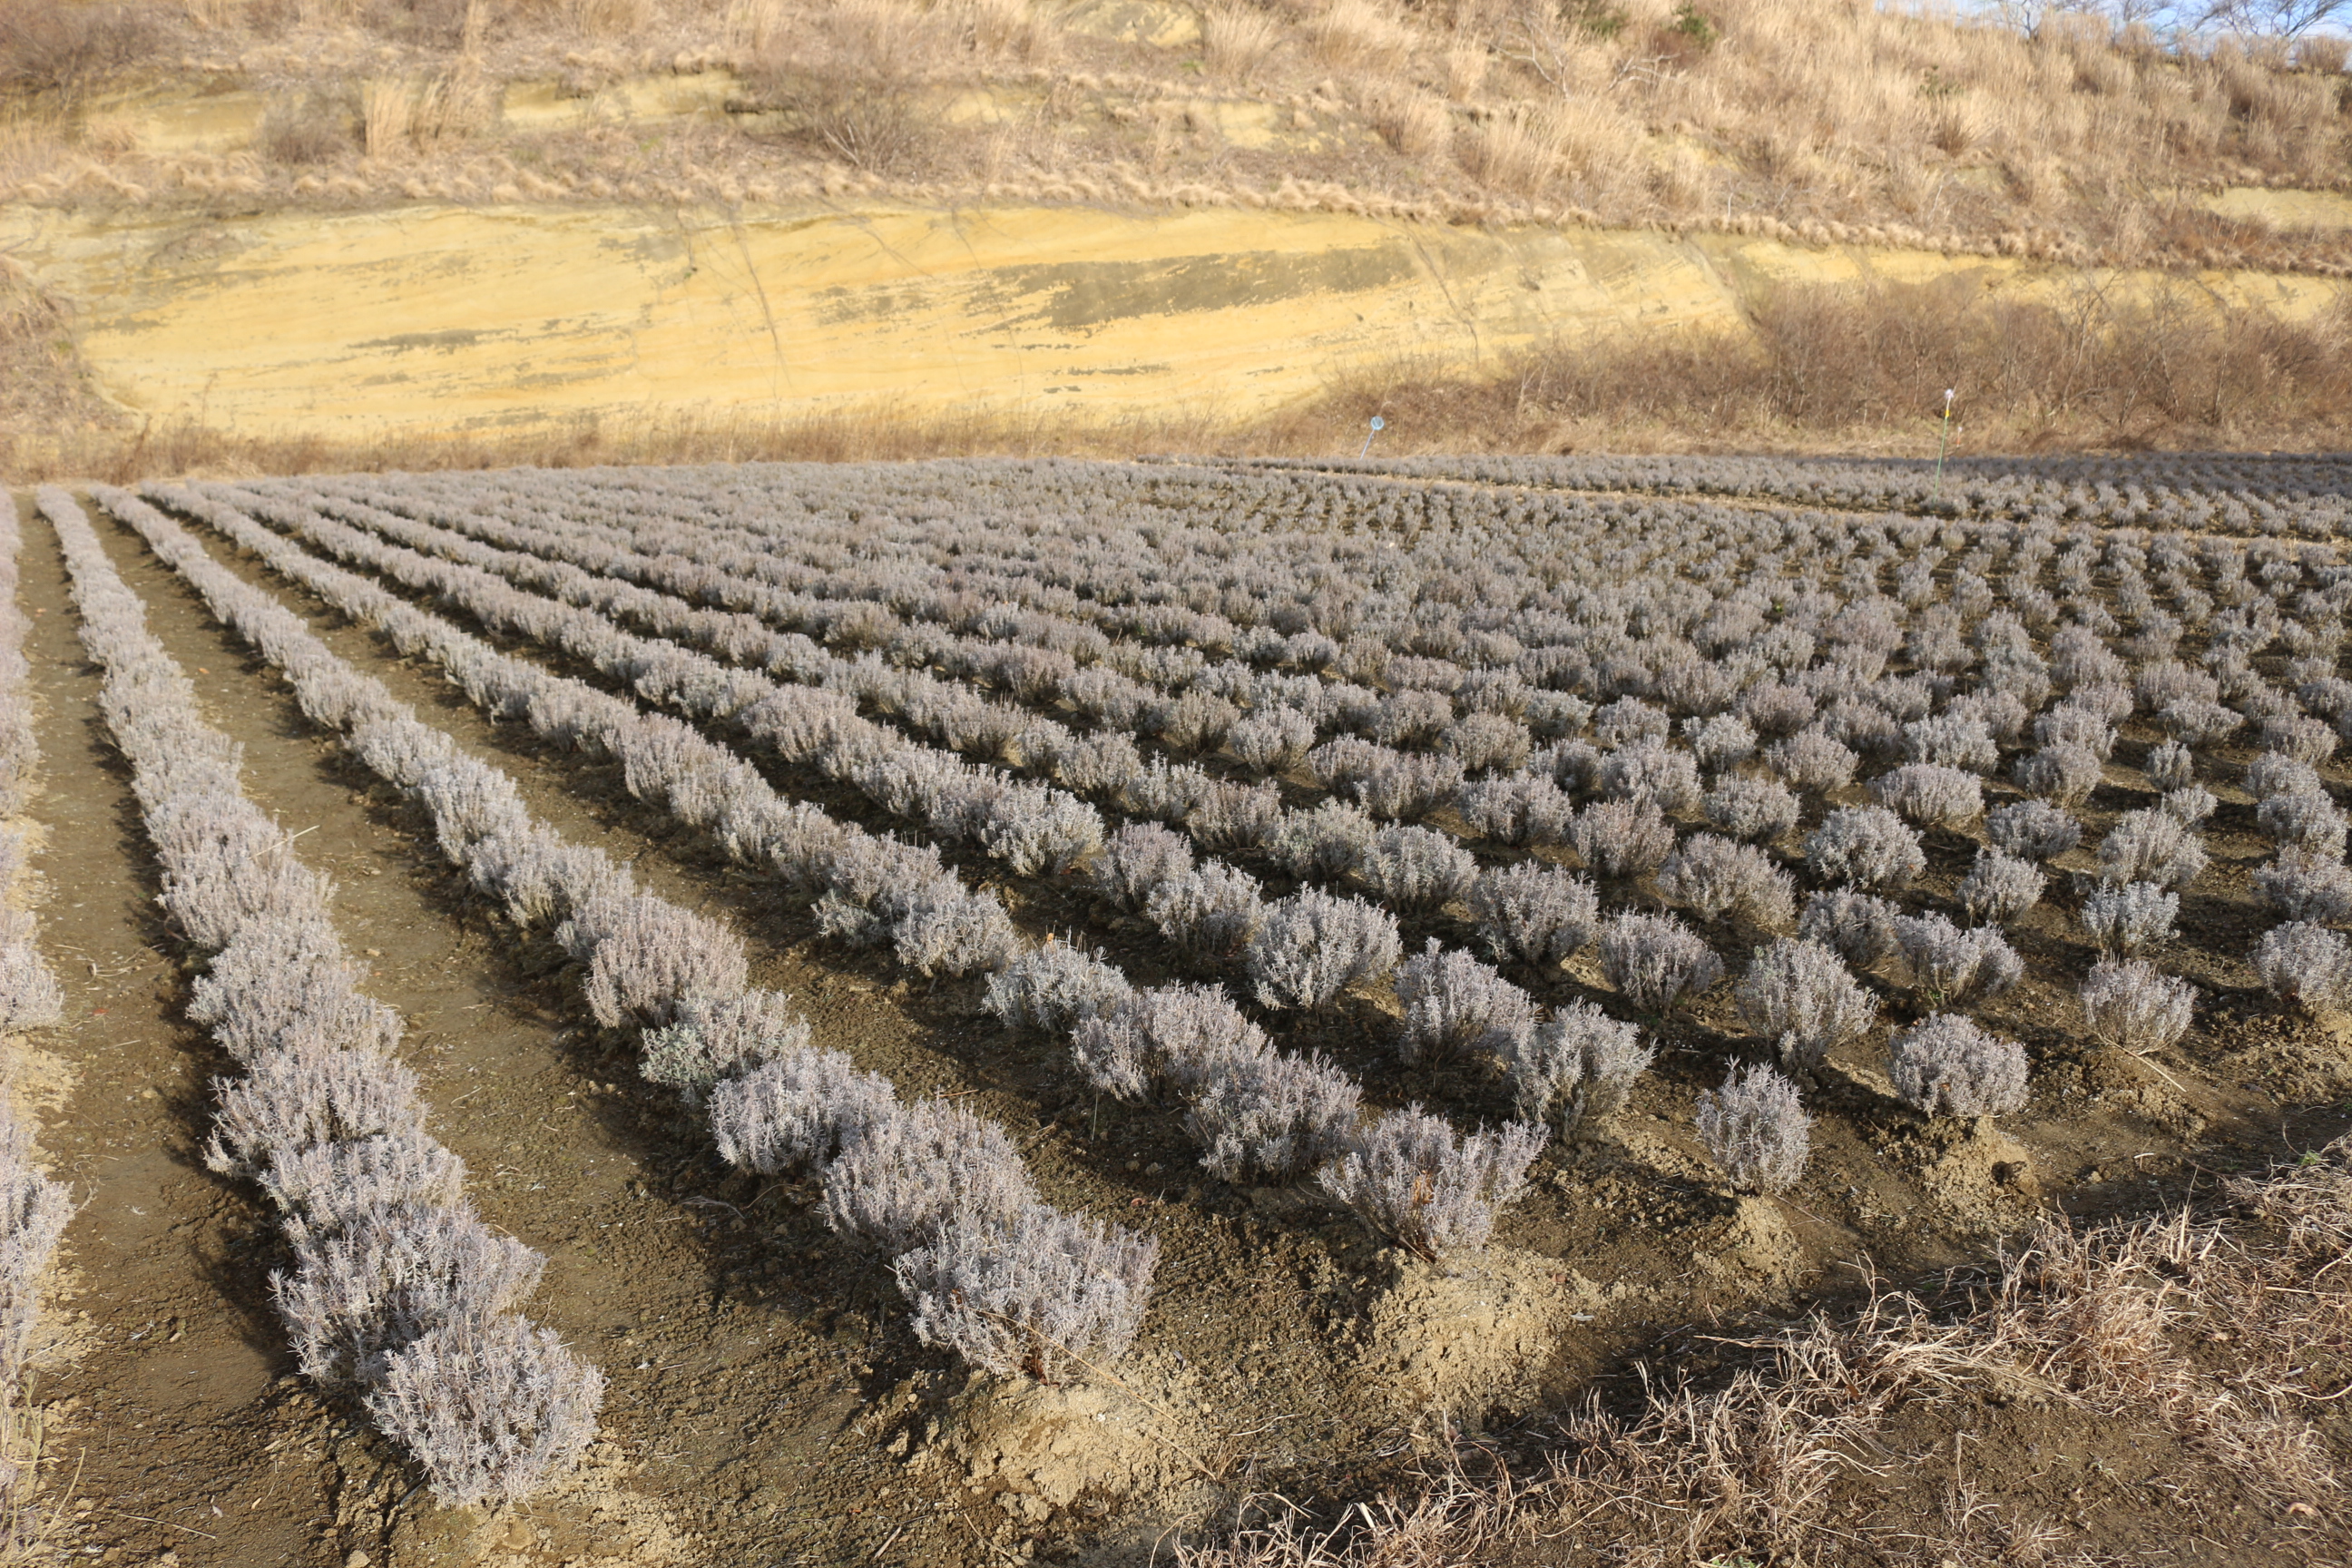 Field of lavender after using EM.
Originally was as the clay soil seen in the back.